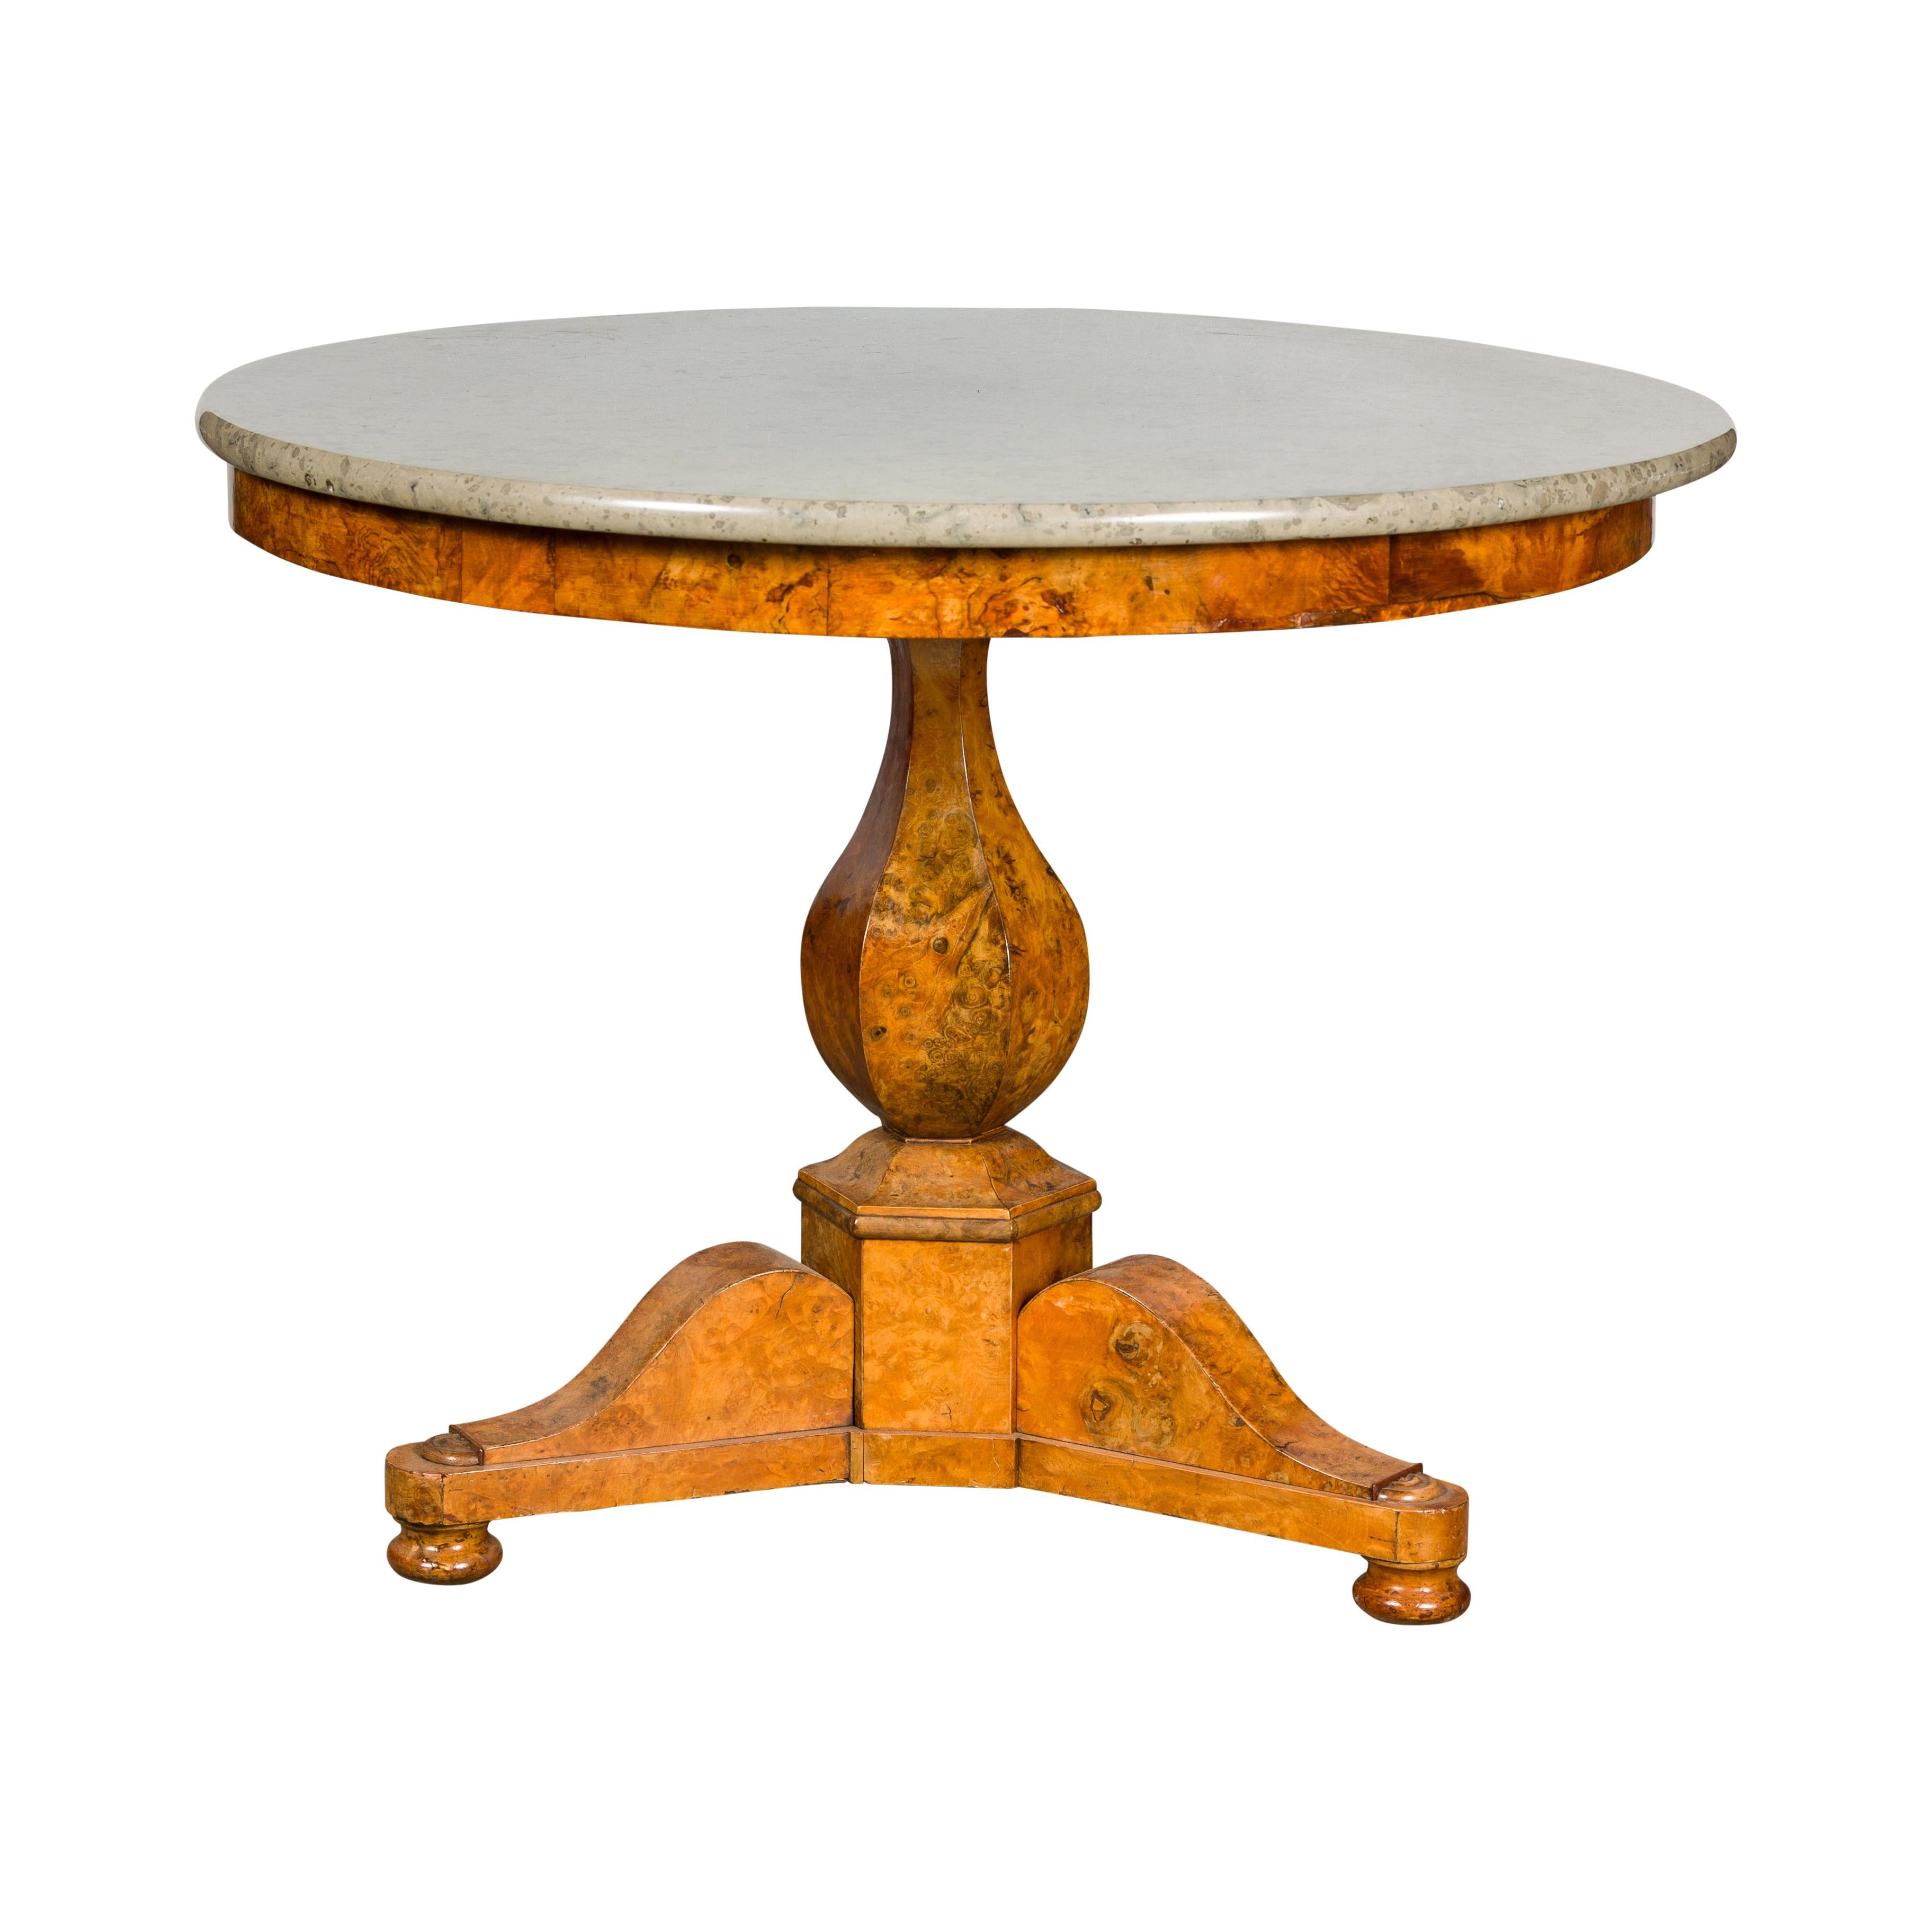 French Empire Walnut Pedestal Table with Round Marble Top and Tripod Base For Sale 6